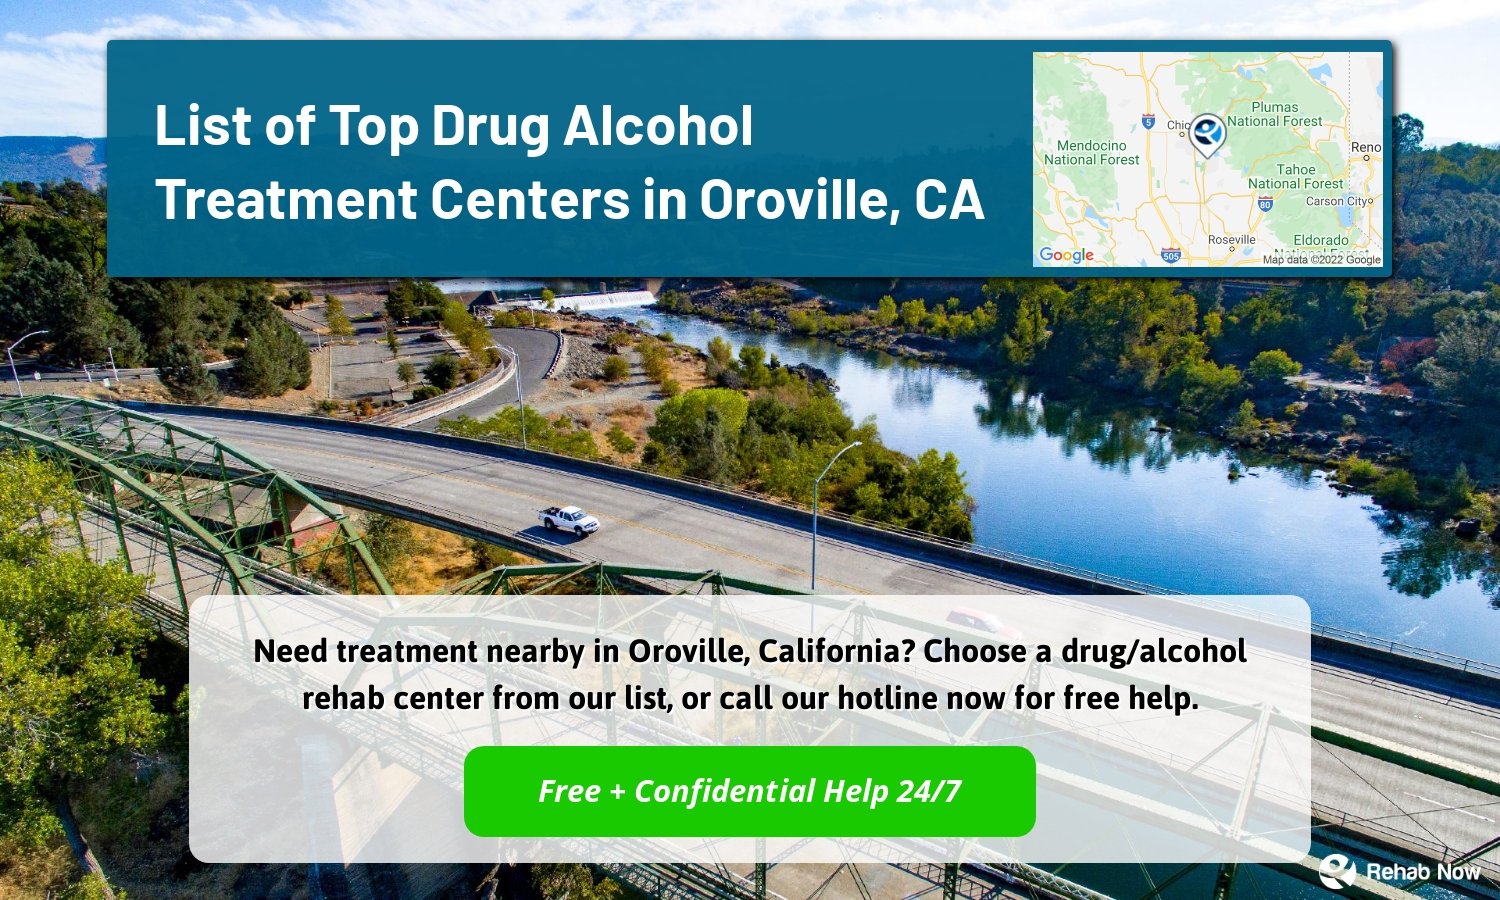 Need treatment nearby in Oroville, California? Choose a drug/alcohol rehab center from our list, or call our hotline now for free help.